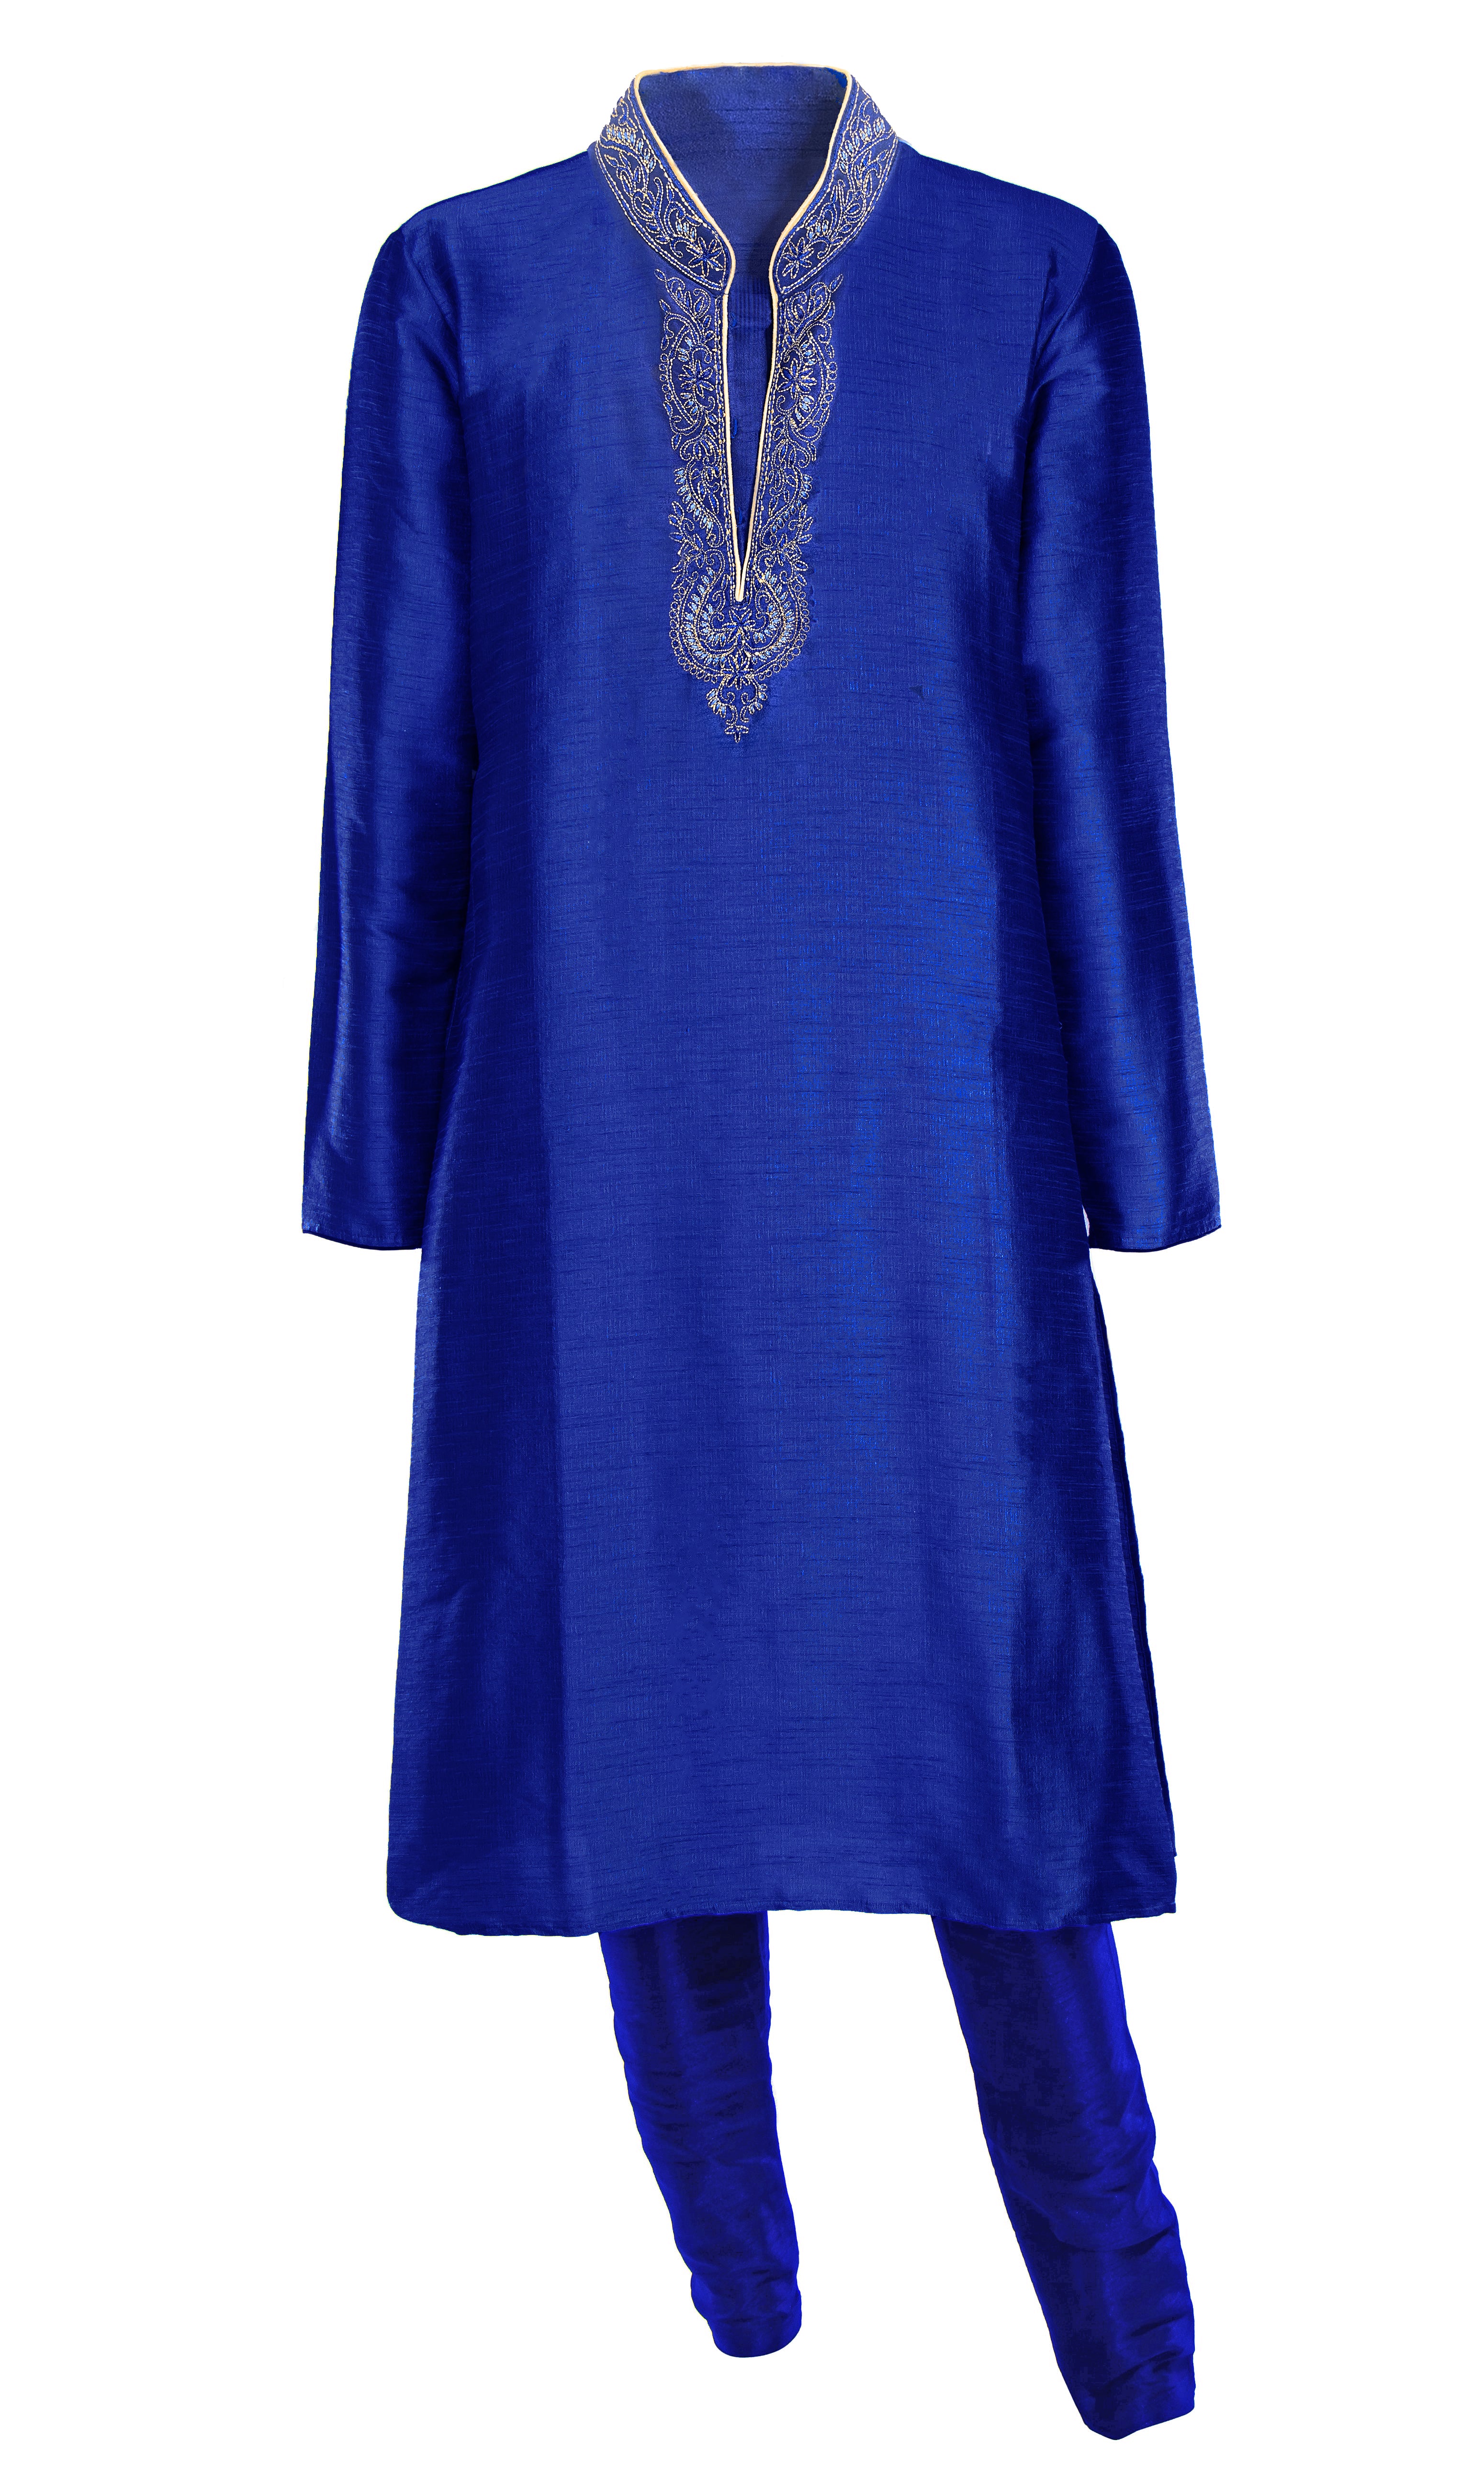 Deep gold embroidery through the center blue kurta paired with a silk blue pant